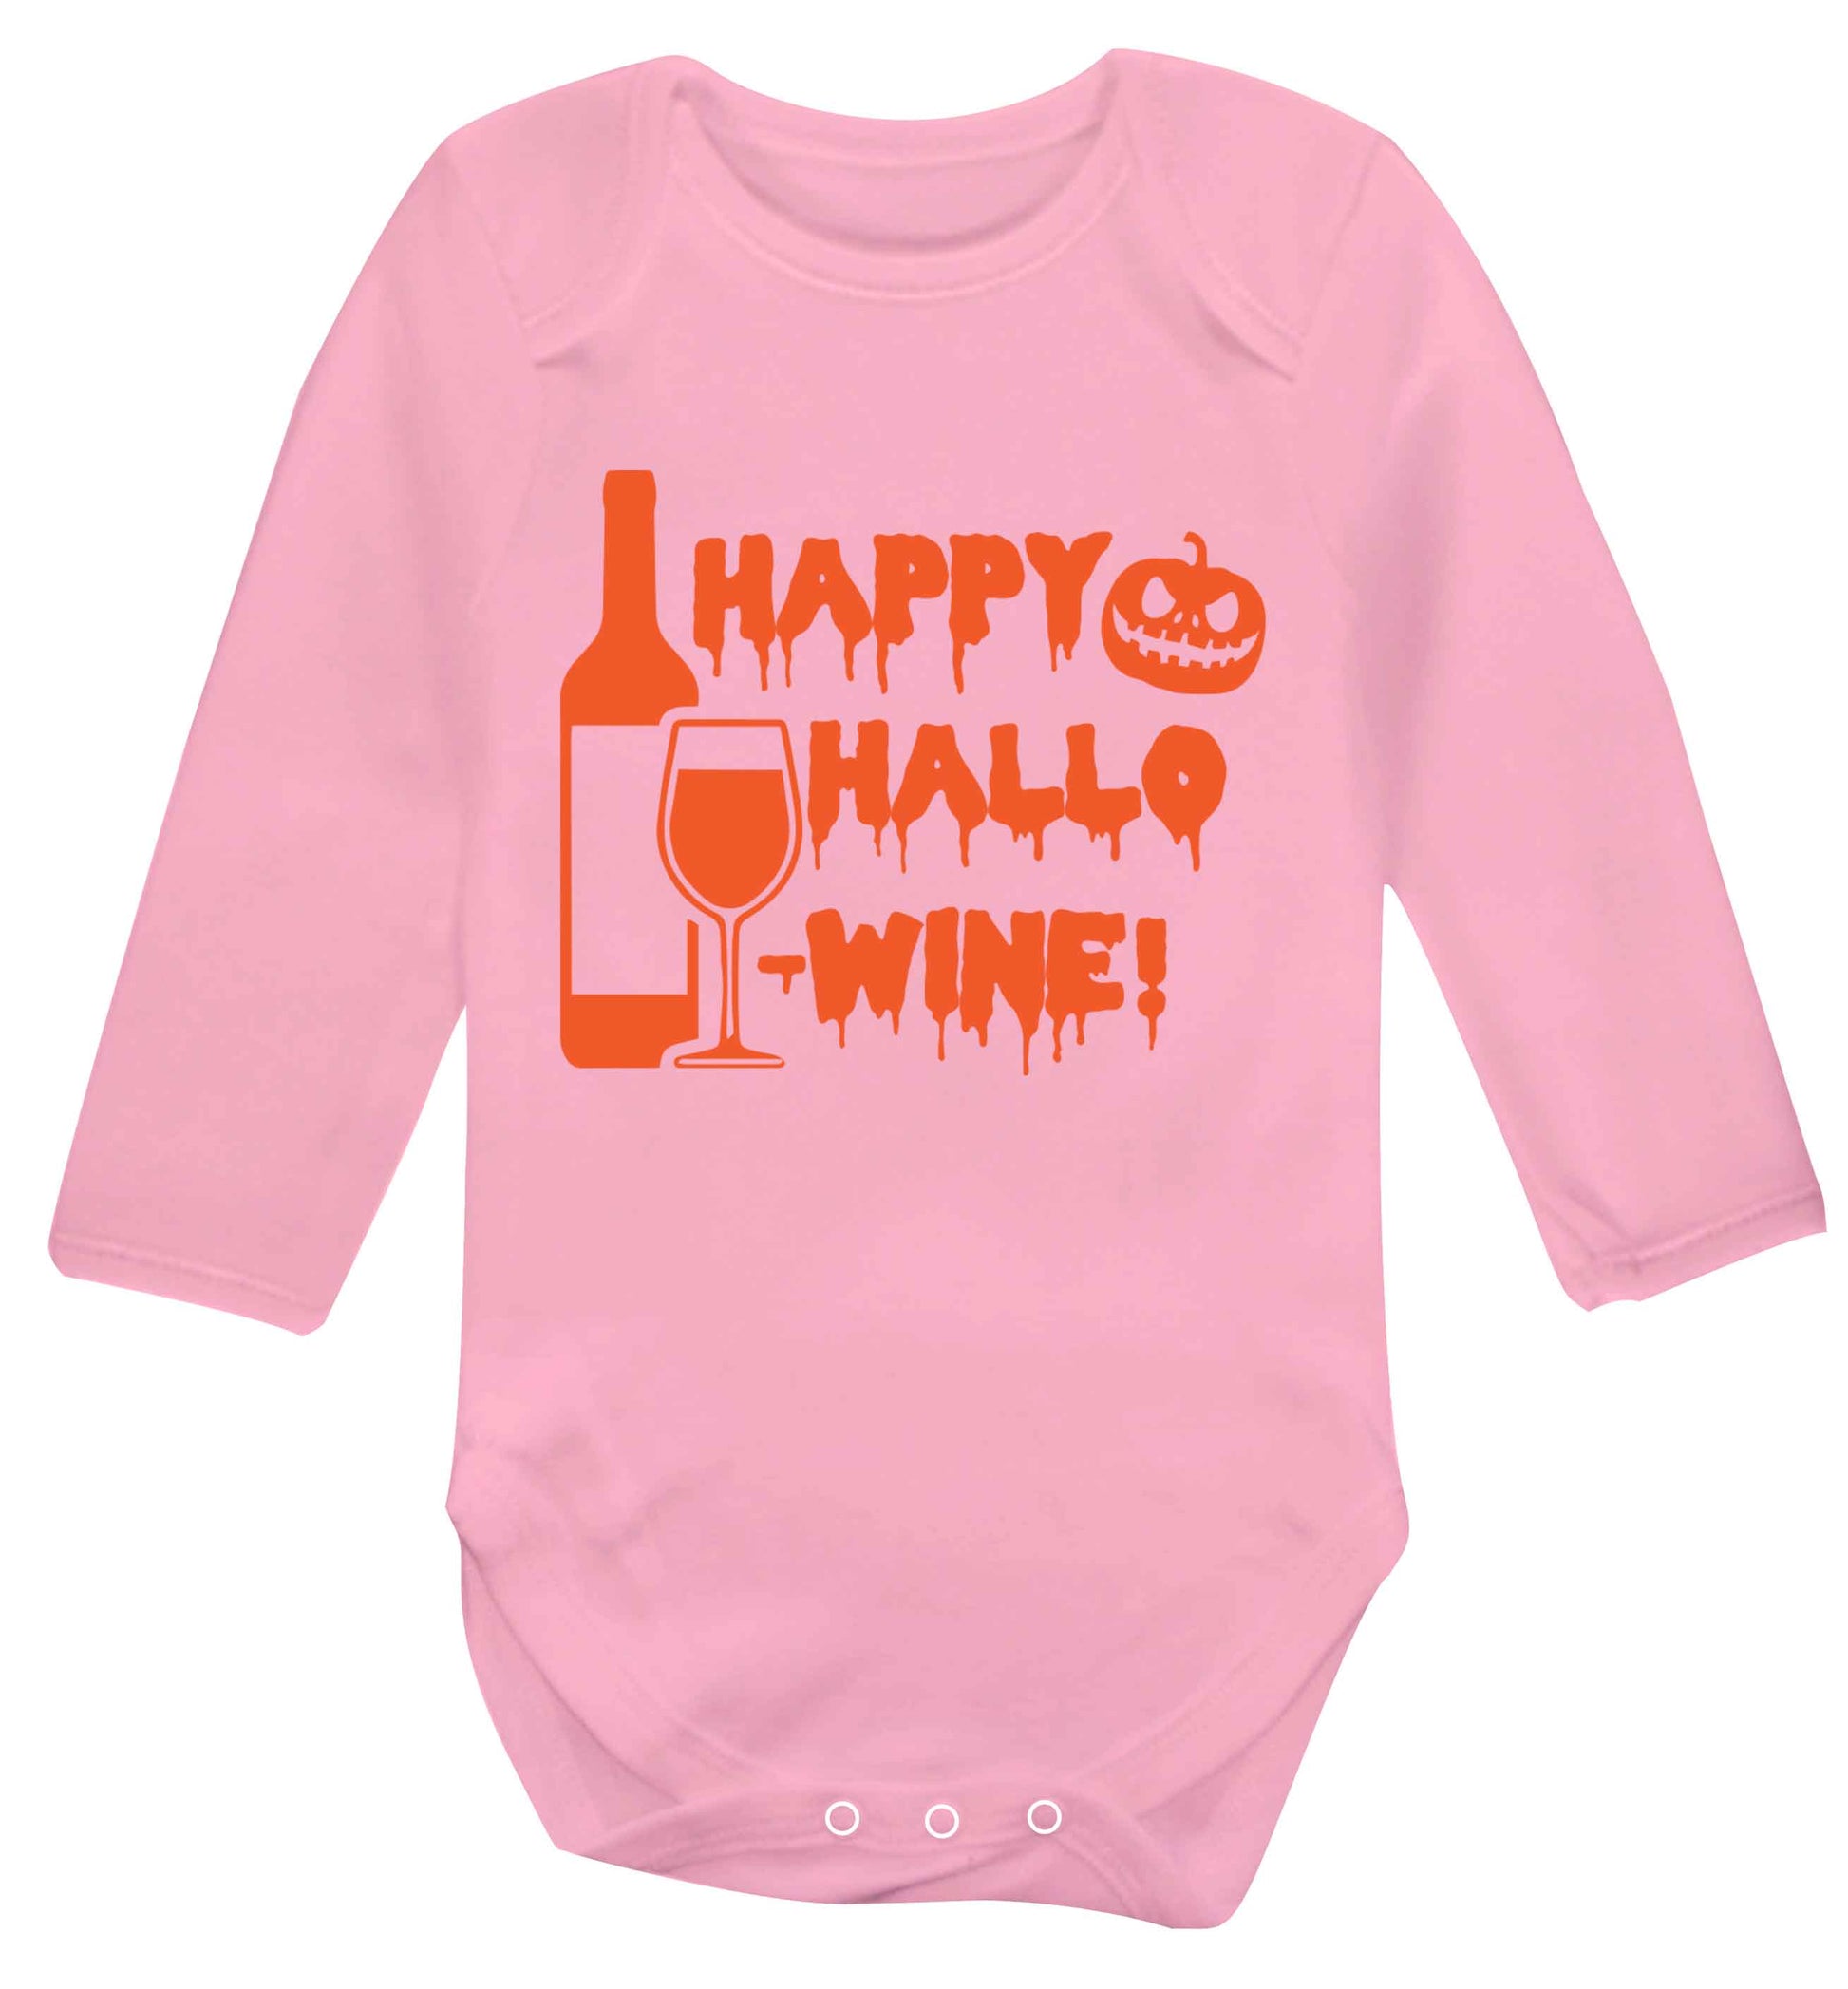 Happy hallow-wine Baby Vest long sleeved pale pink 6-12 months